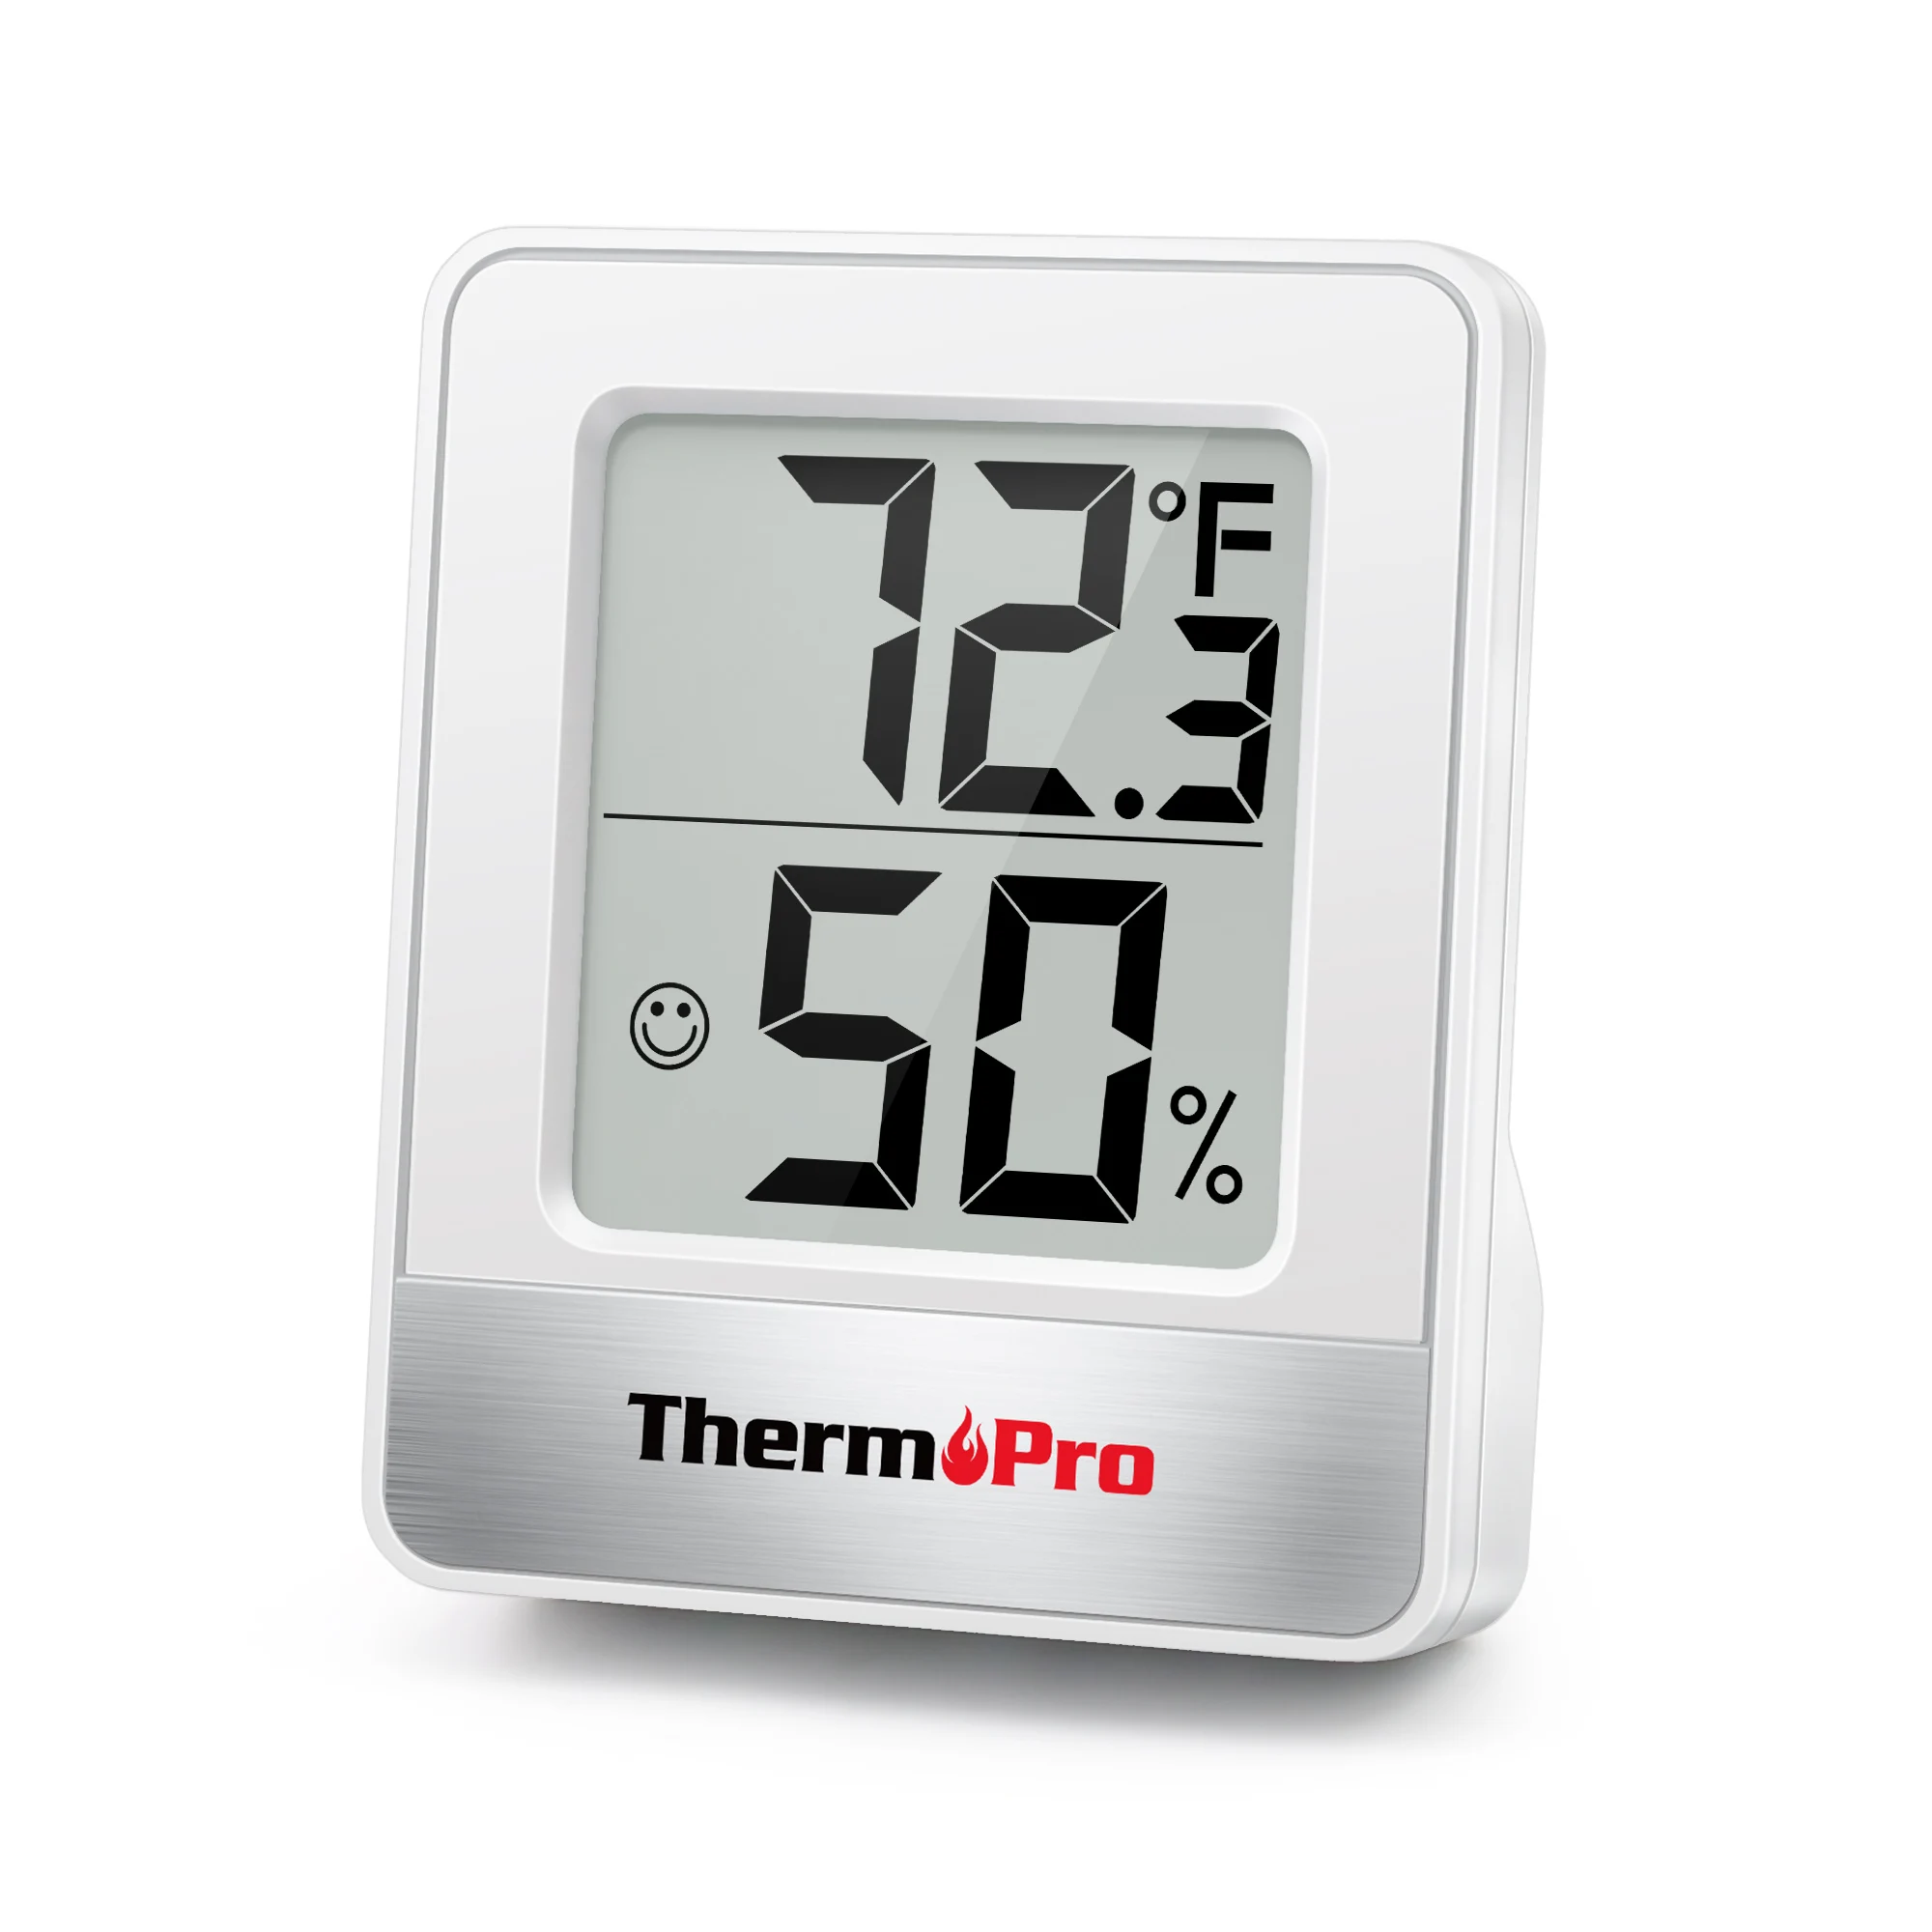 ThermoPro TP49 Mini Digital Indoor Room Thermometer Hygrometer For Home Weather Station Black White